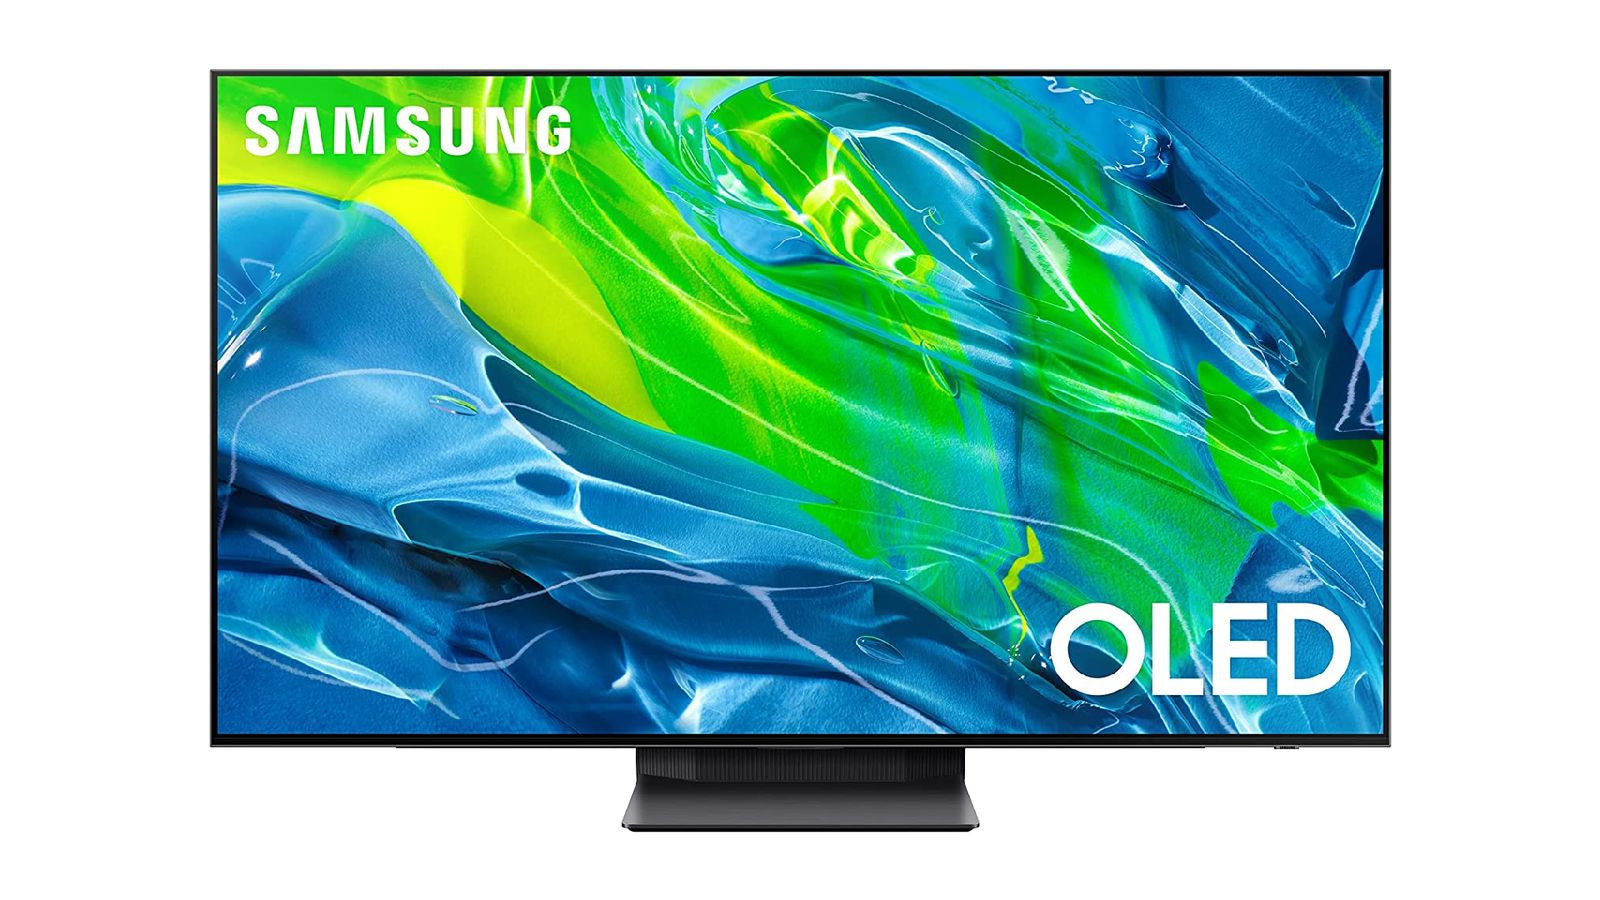 Best OLED TV - Samsung S95B dark grey-framed TV with a green and blue pattern on the display.